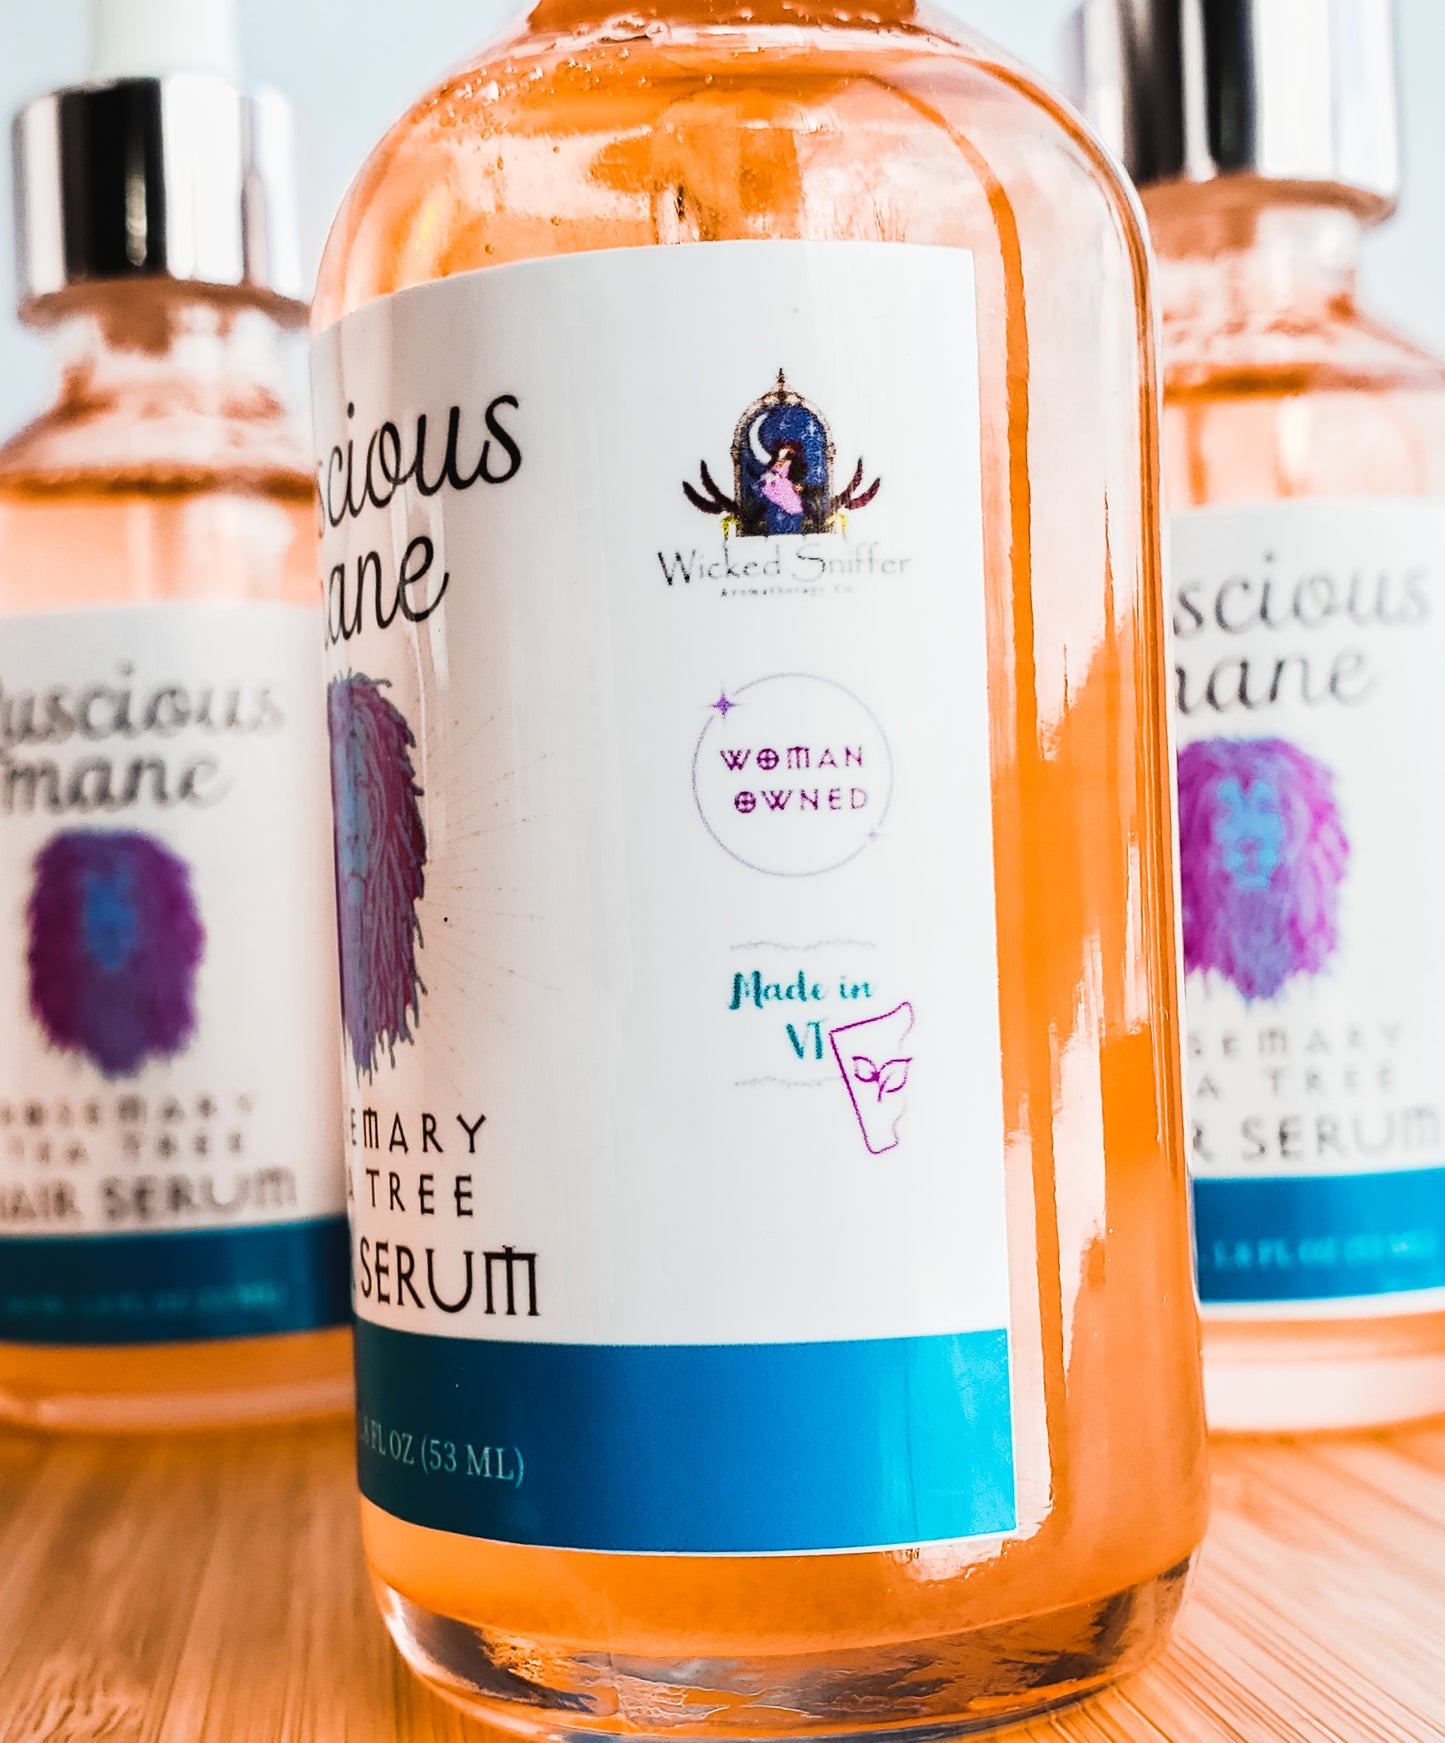 Photo of 3 orange bottles with white labels with a purple and blue lions that says luscious mane rosemary Tea Tree hair serum.